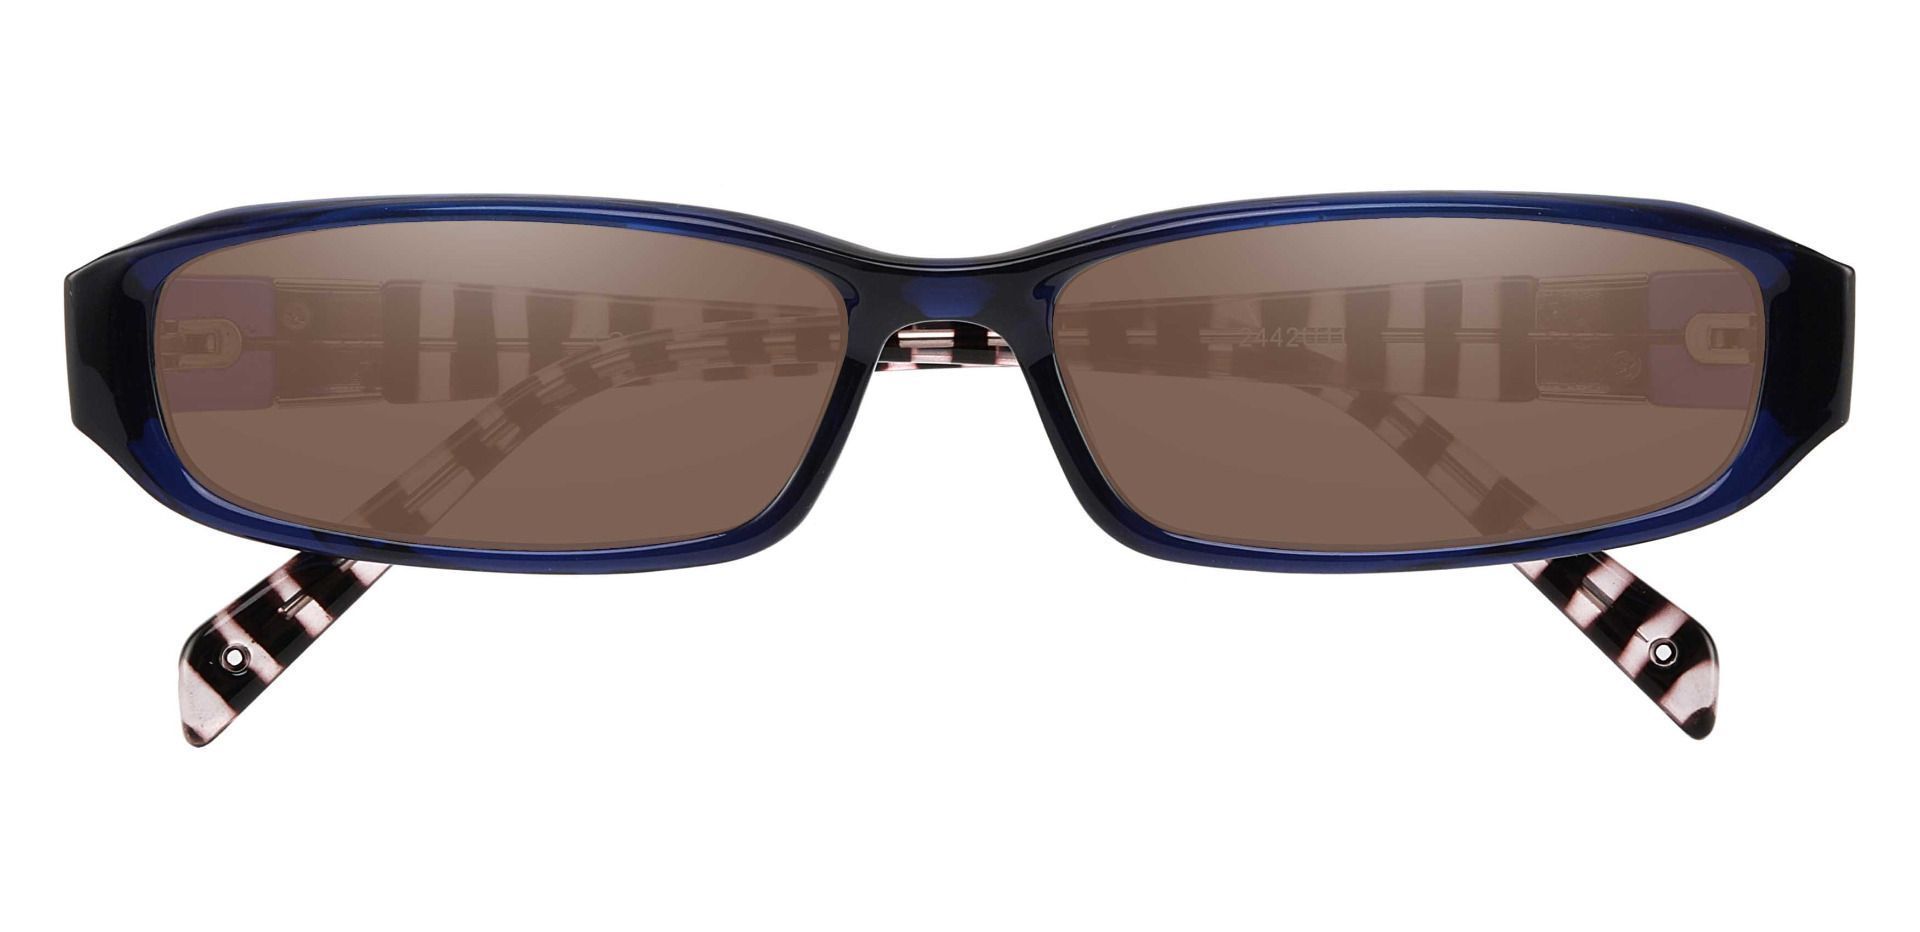 Mulberry Rectangle Non-Rx Sunglasses - Blue Frame With Brown Lenses